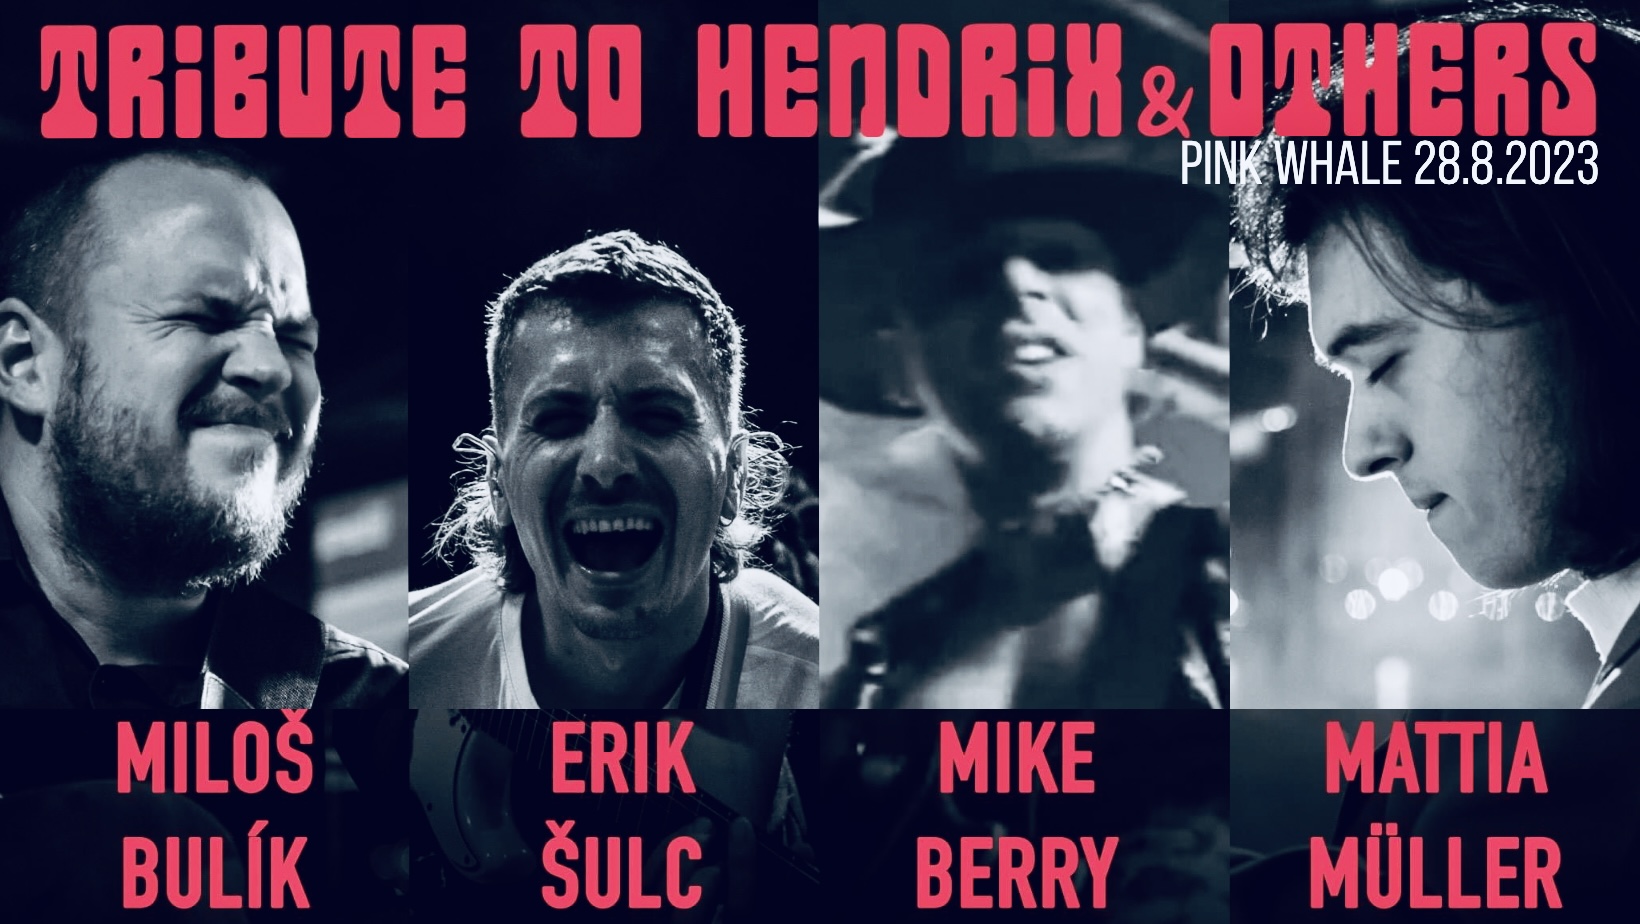 Tribute to Hendrix & others PINK WHALE